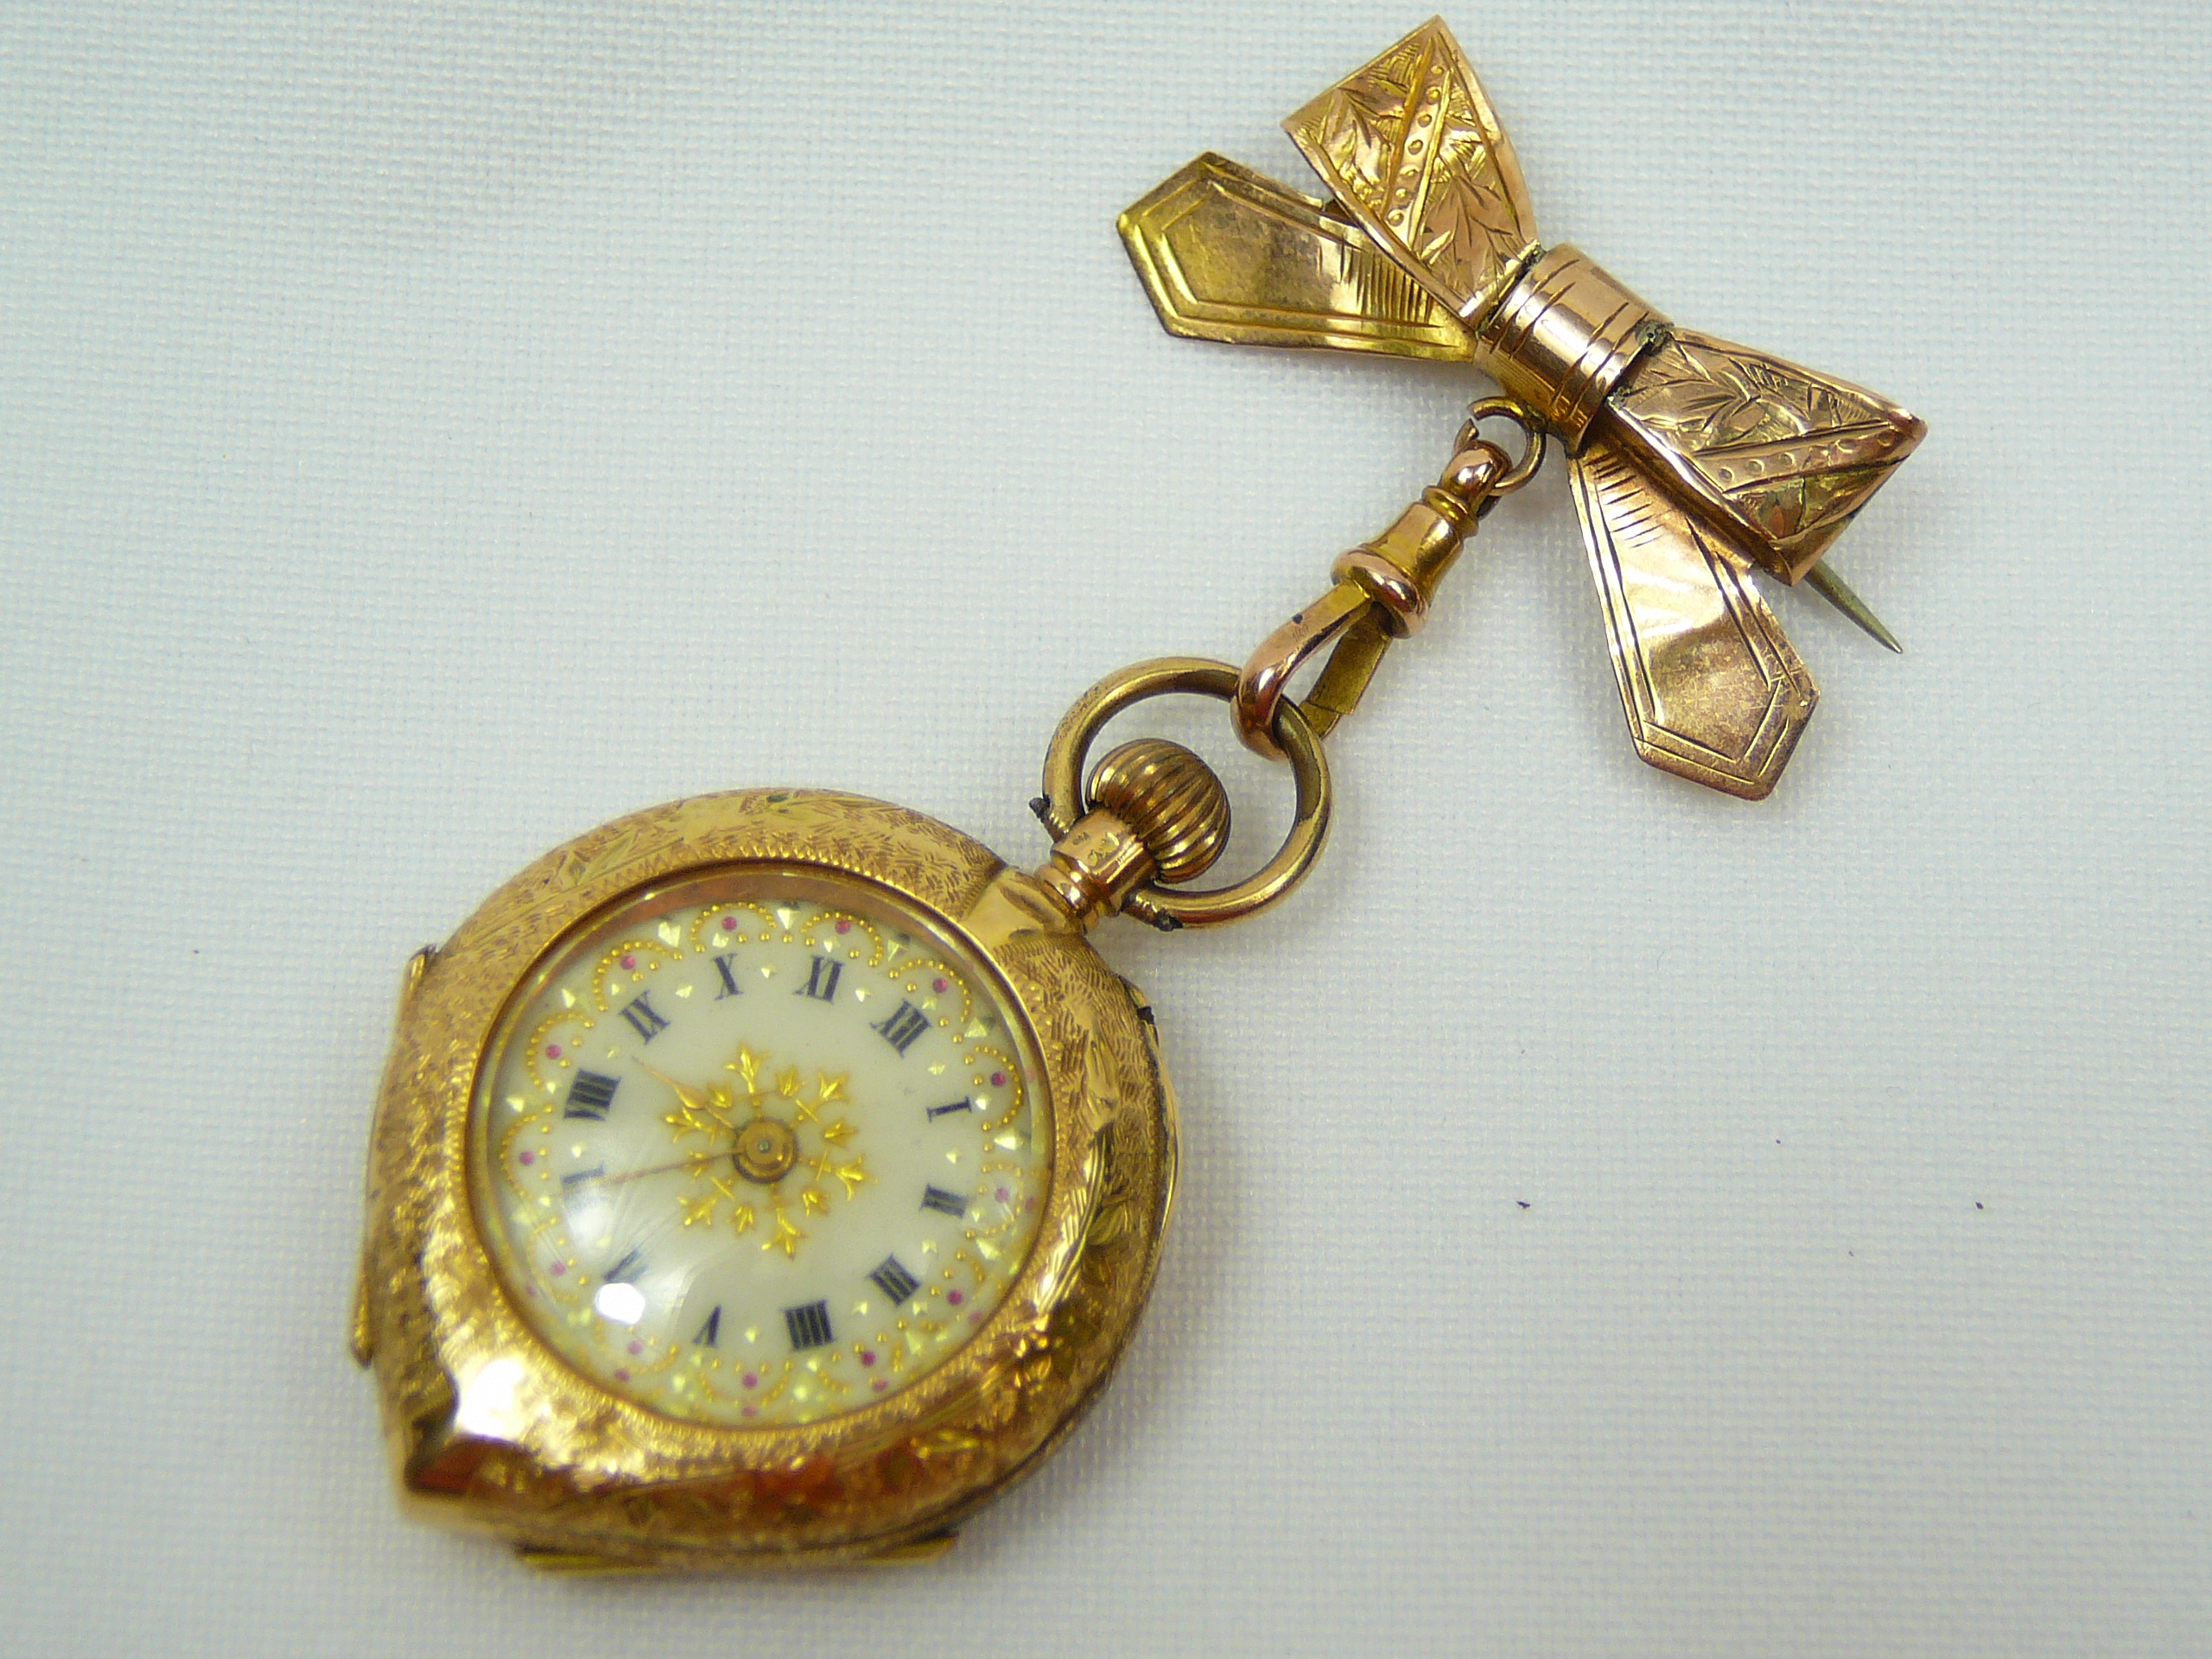 Ladies Antique Gold Brooch Fob Watch